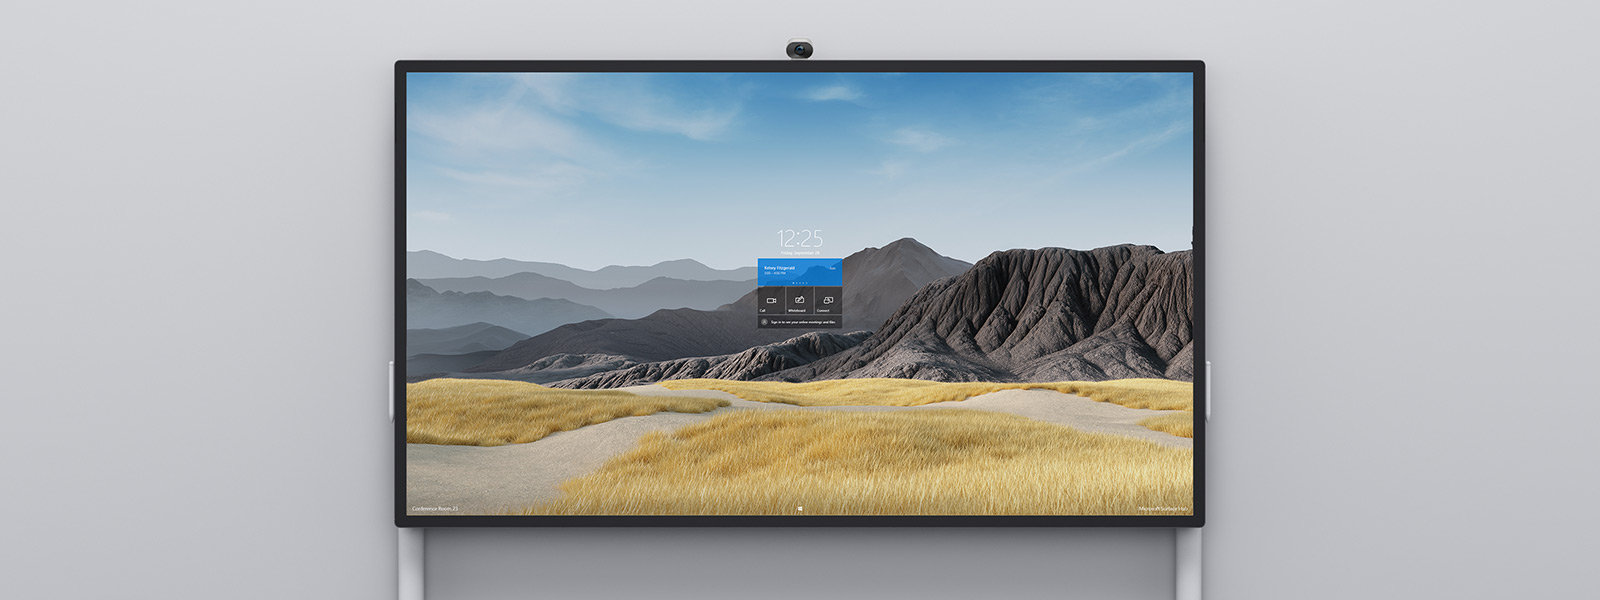 A Surface Hub 2S in the 85-inch size is observed